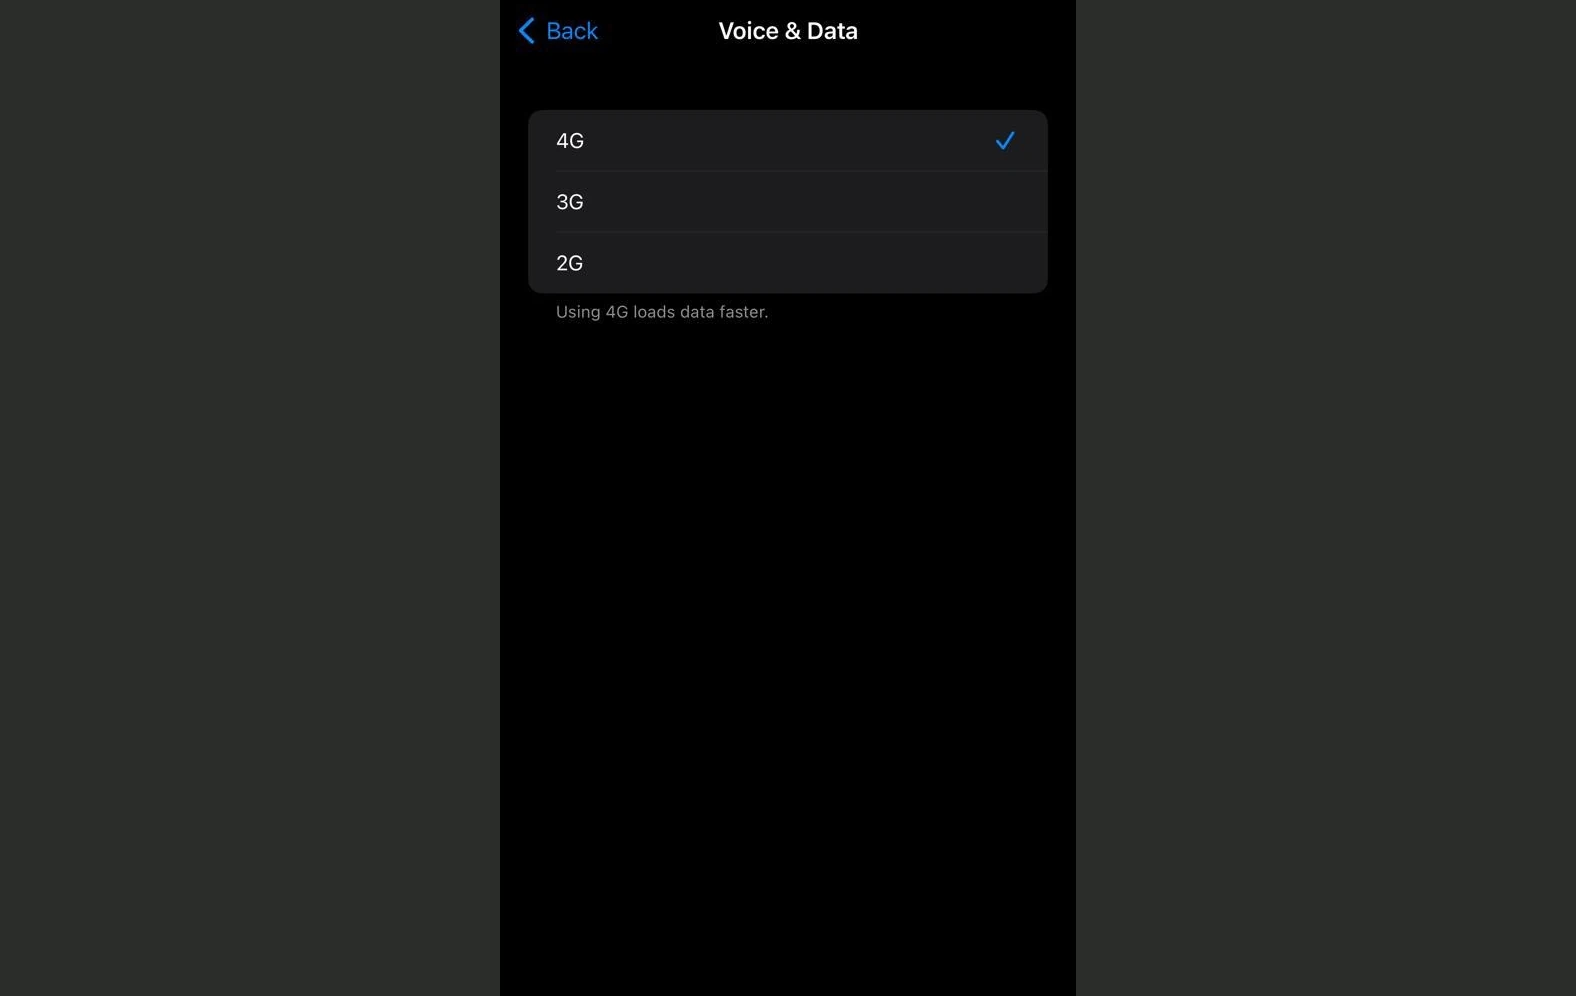 Manual Network Selection on iPhone